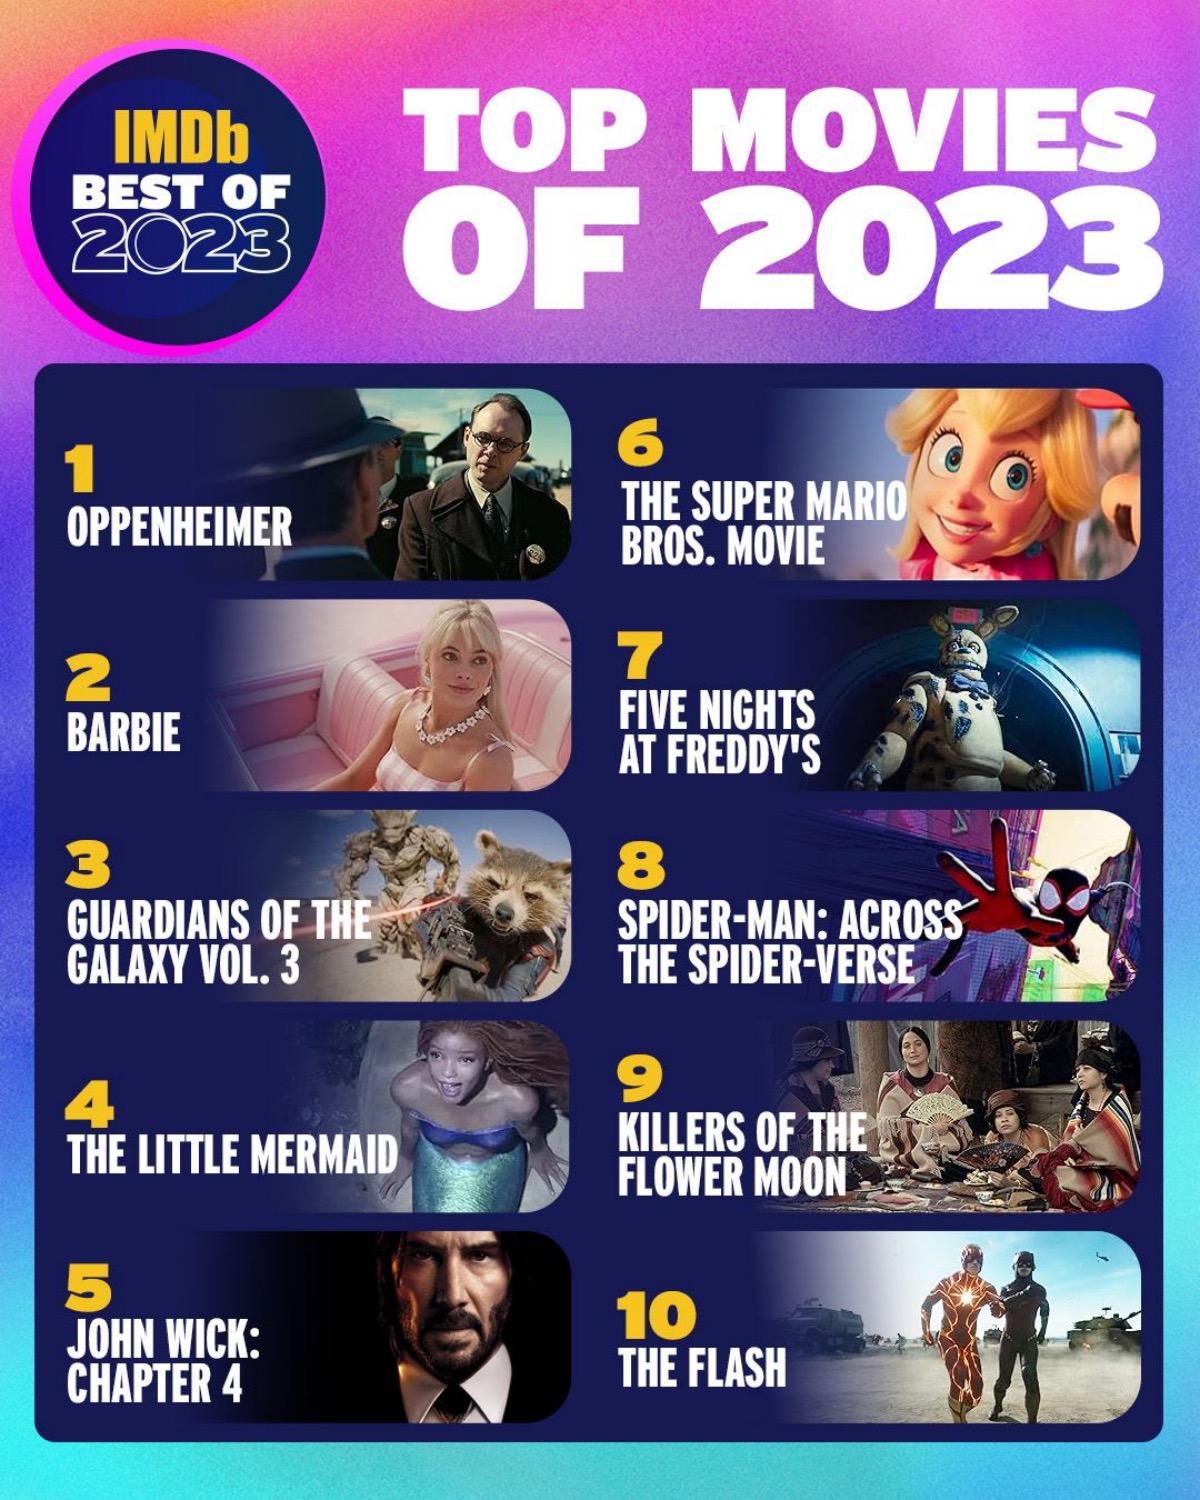 The Top 10 Movies and Shows of 2023, Ranked by IMDb